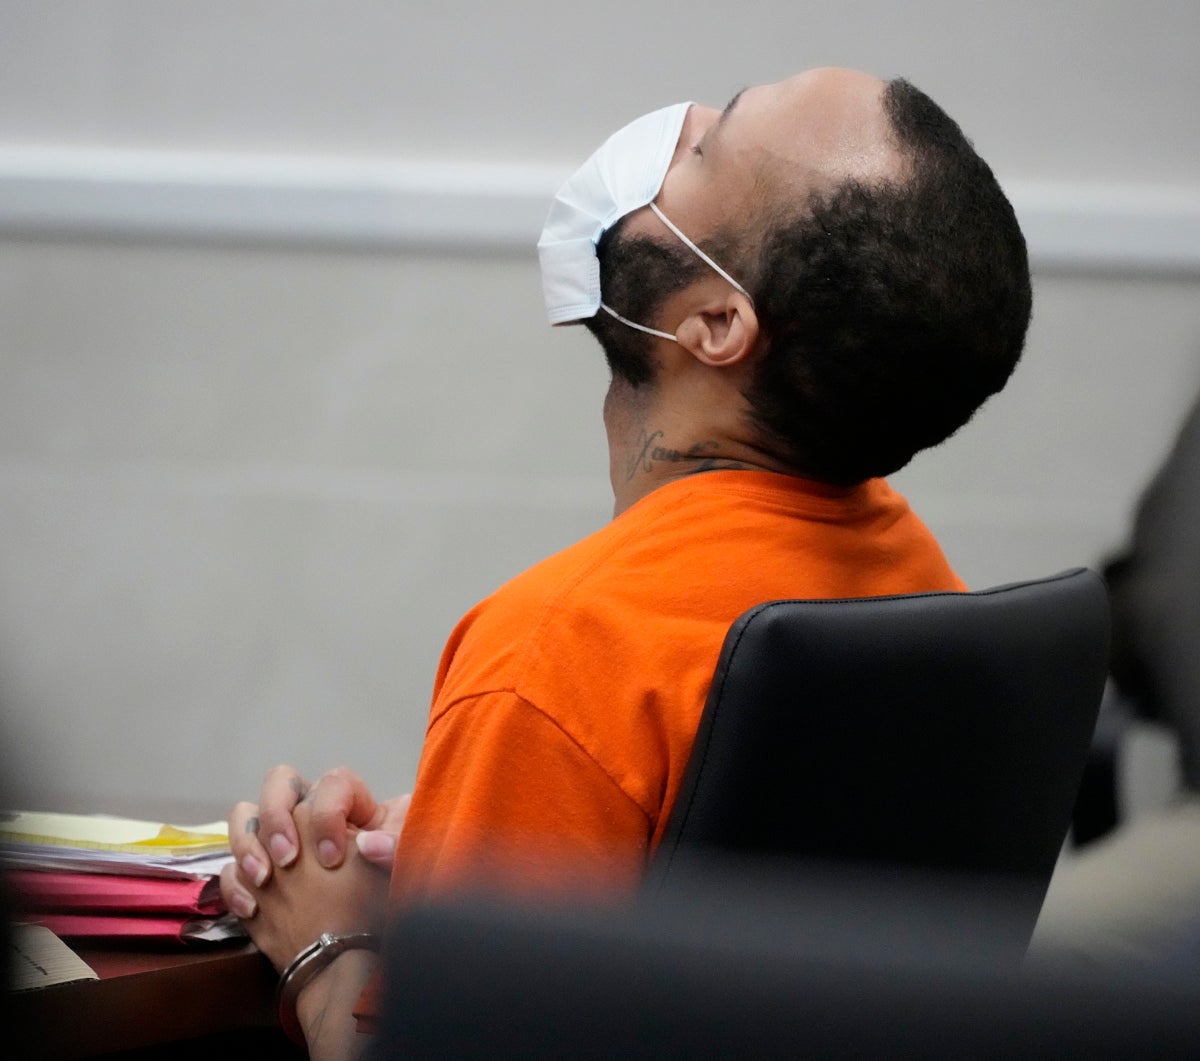 Waukesha parade killer Darrell Brooks derails sentencing by refusing to accept result in two-hour speech